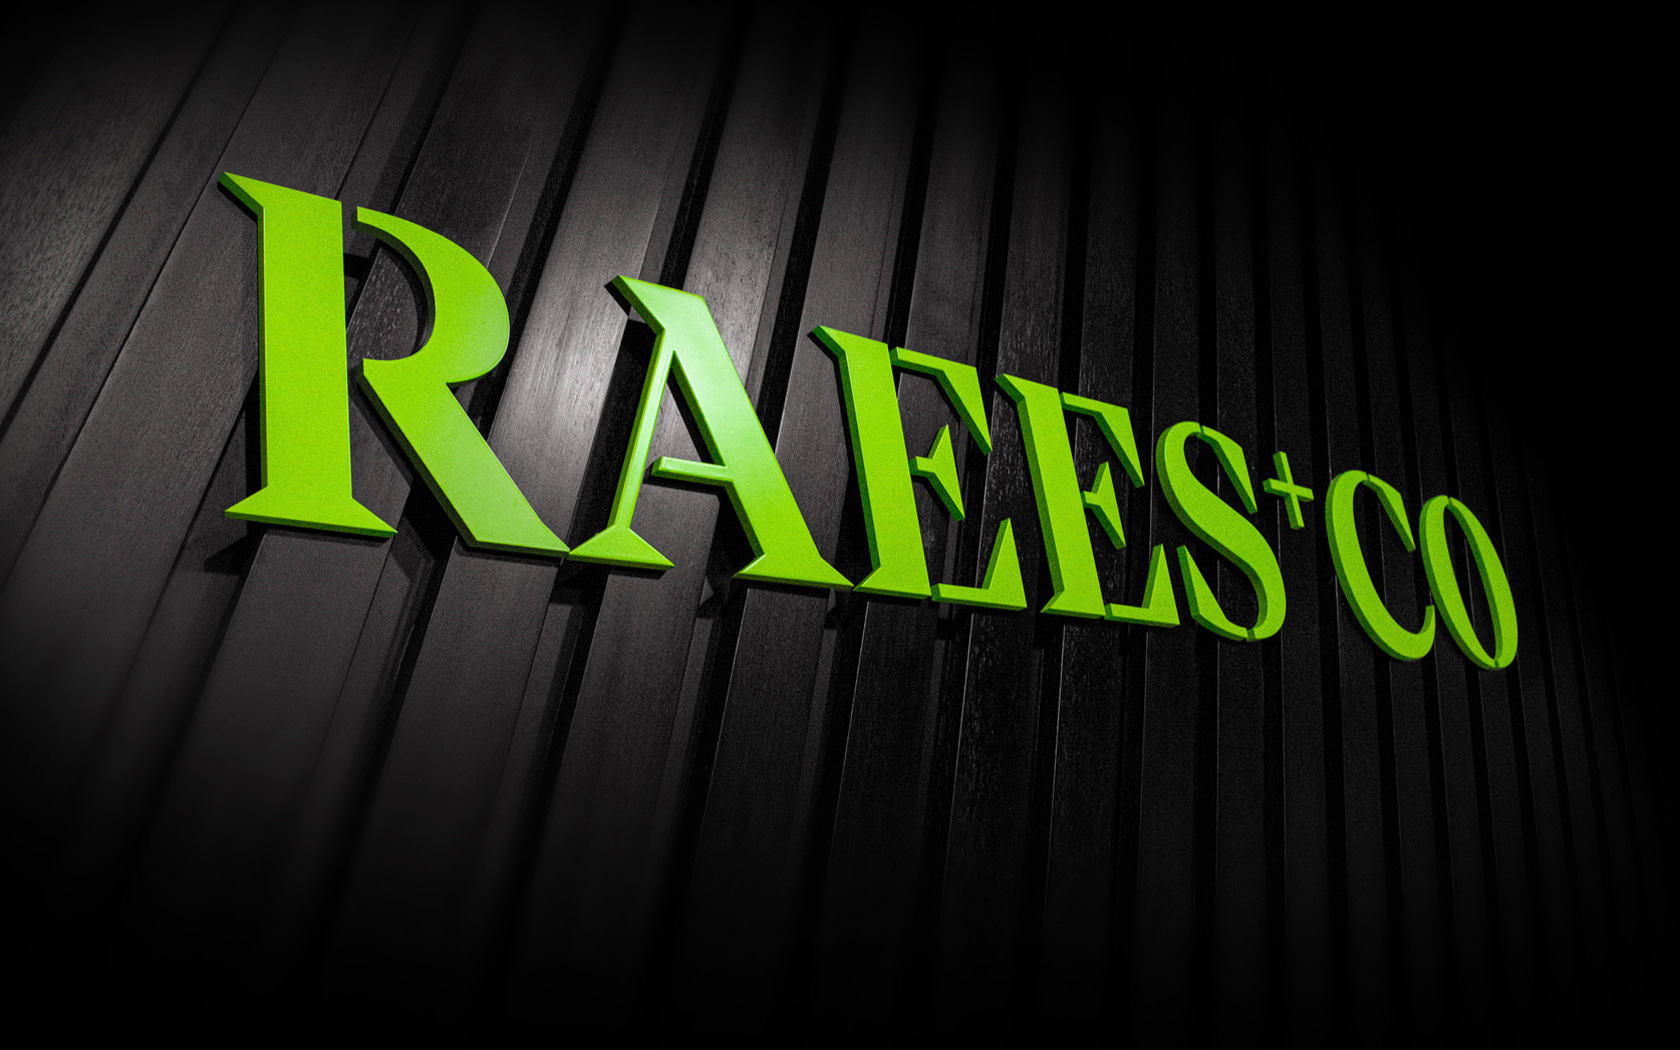 Raees & Co. Brand logo with 3d cutout letter